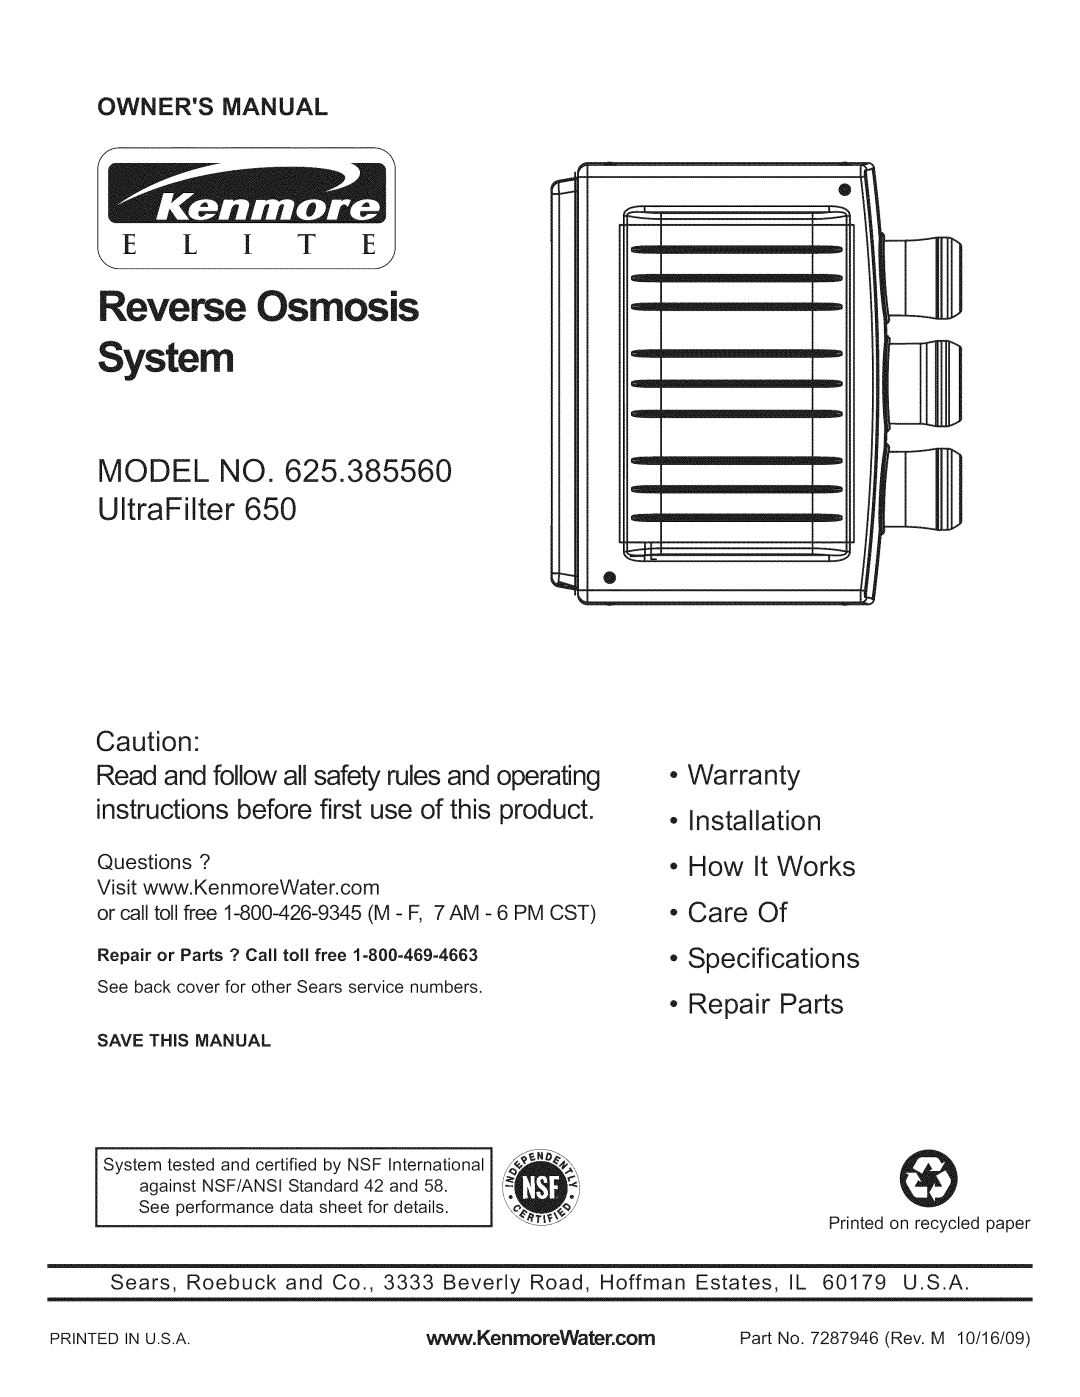 Kenmore 625.38556 owner manual Z D, System, Reverse Osmosis, MODEL NO UltraFilter, E L I T, Repair Parts, Save This Manual 